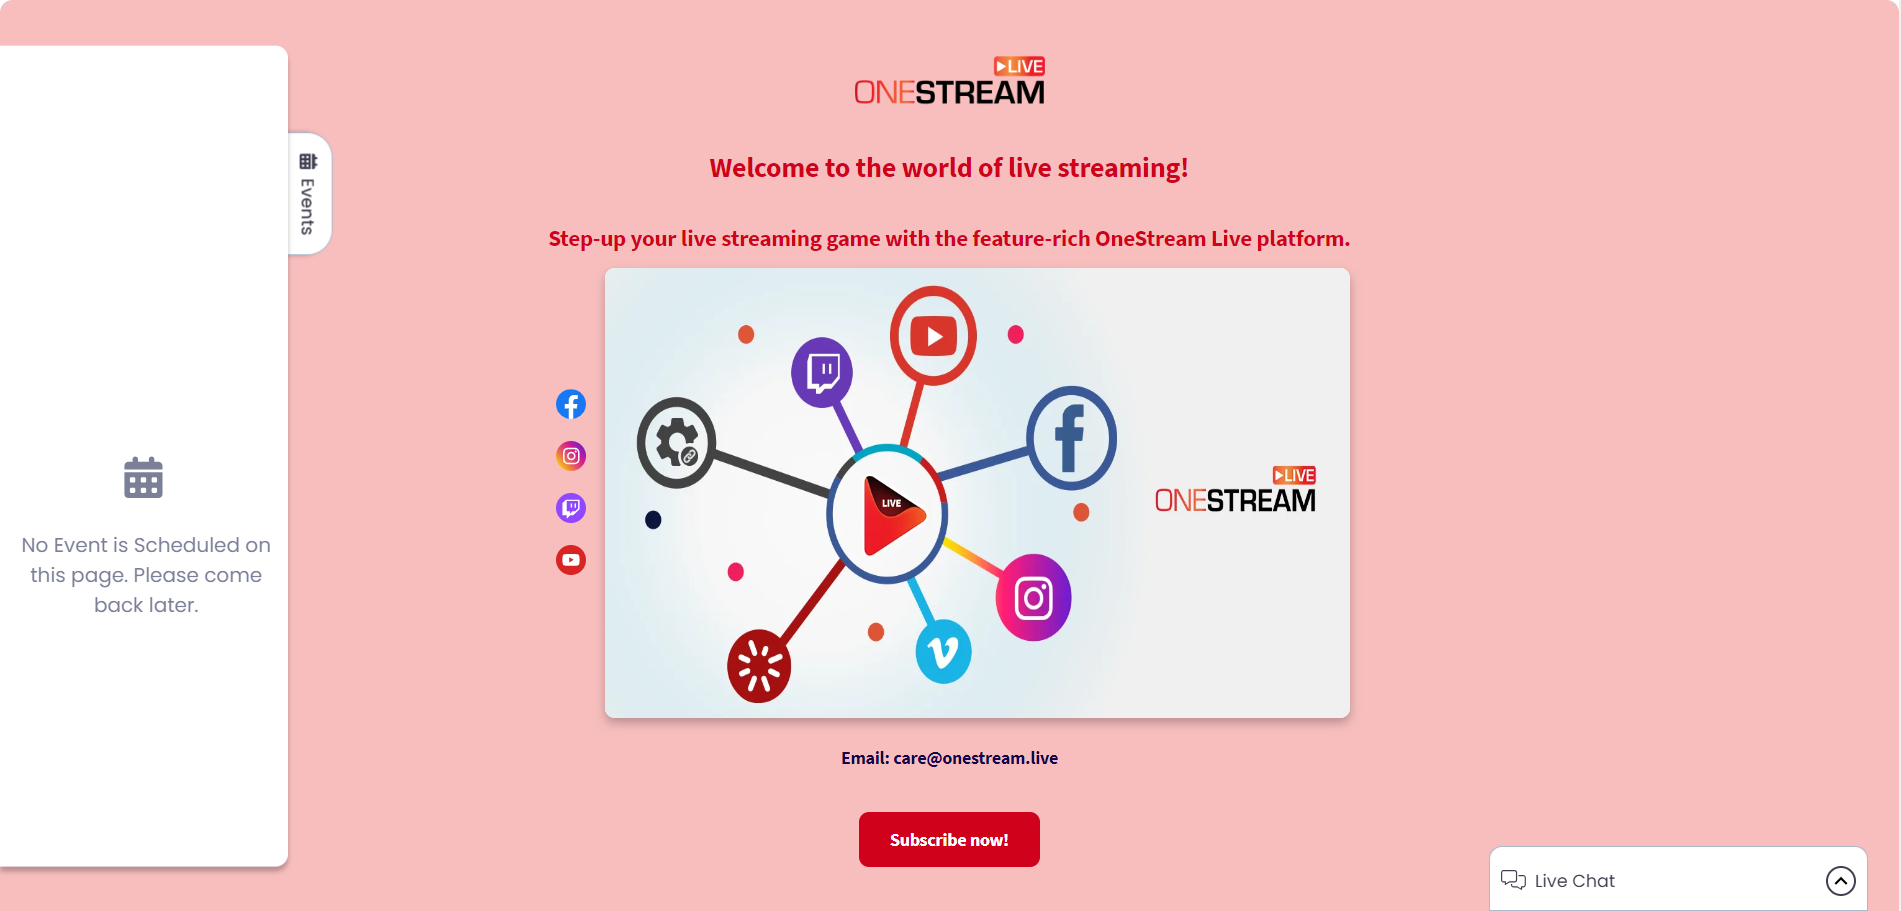 OneStream Live's Hosted Live Page